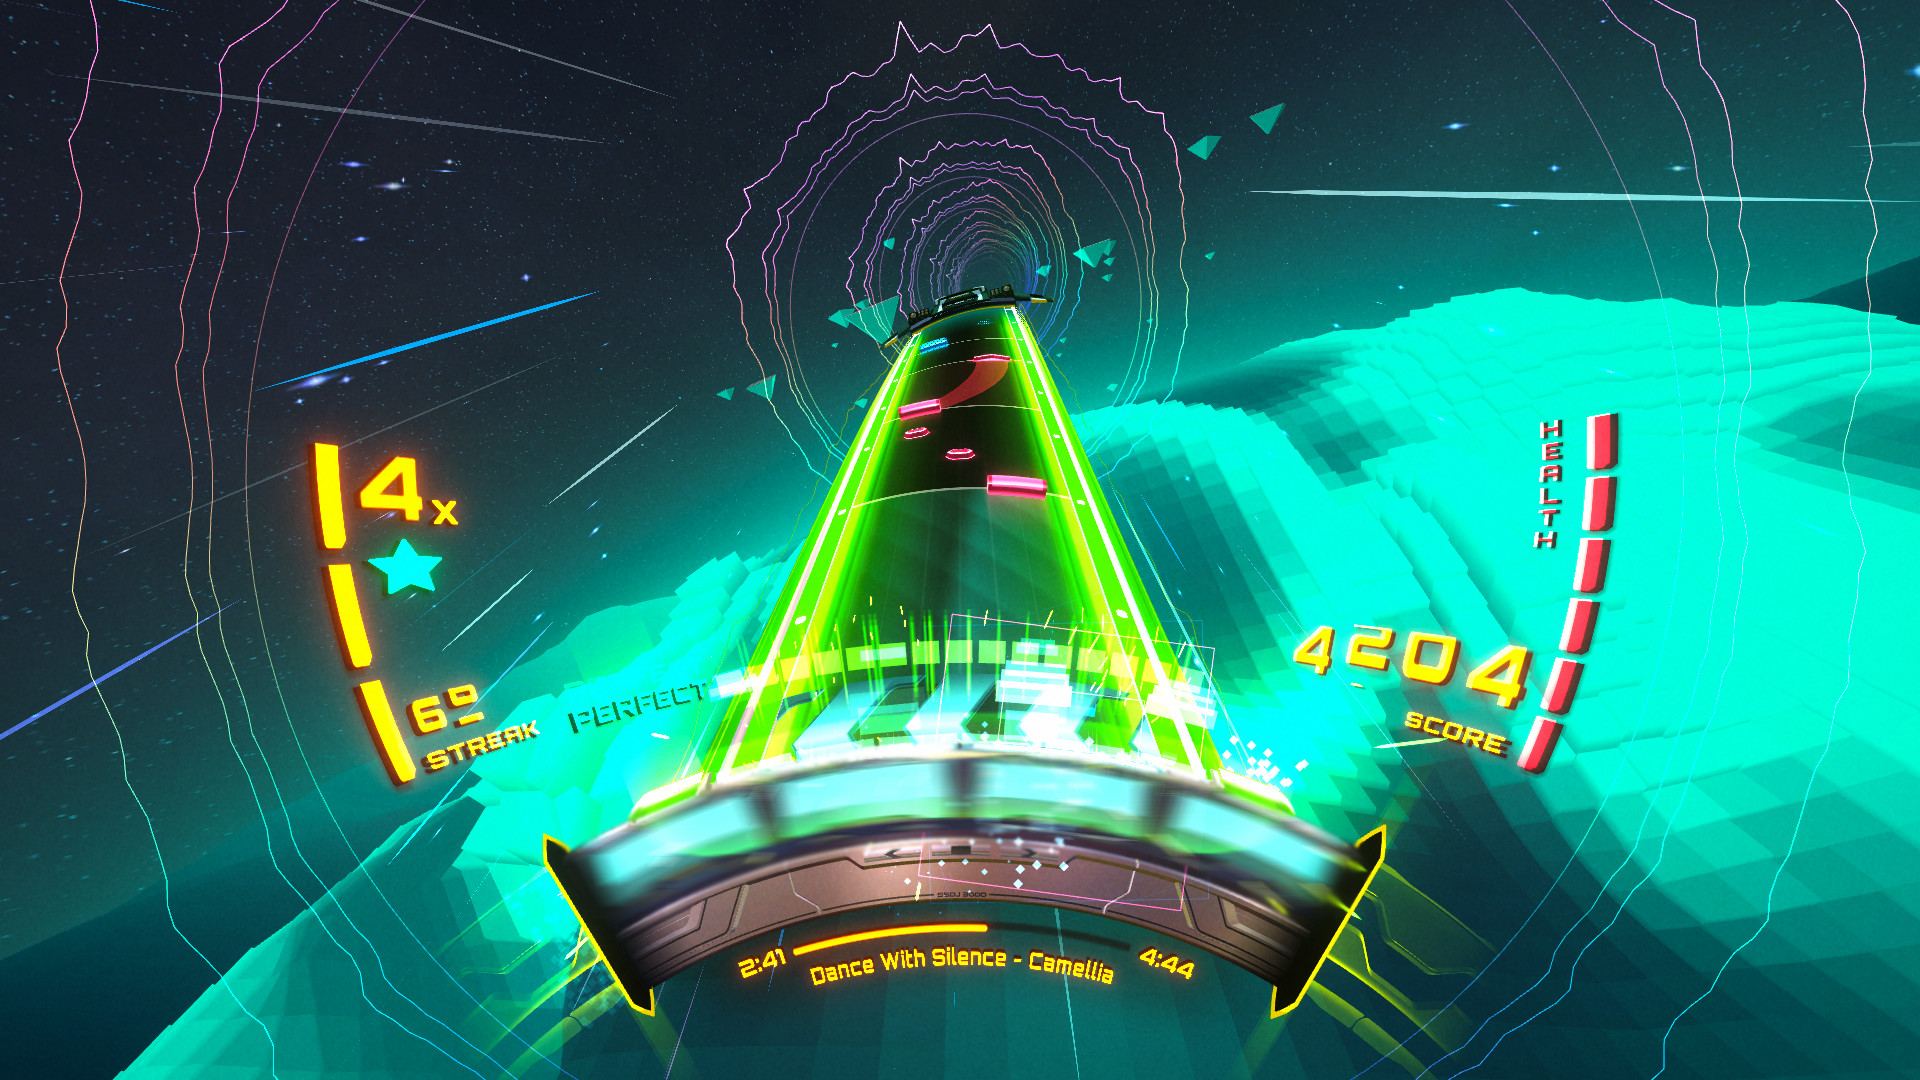 Spin Rhythm XD Free Download for PC